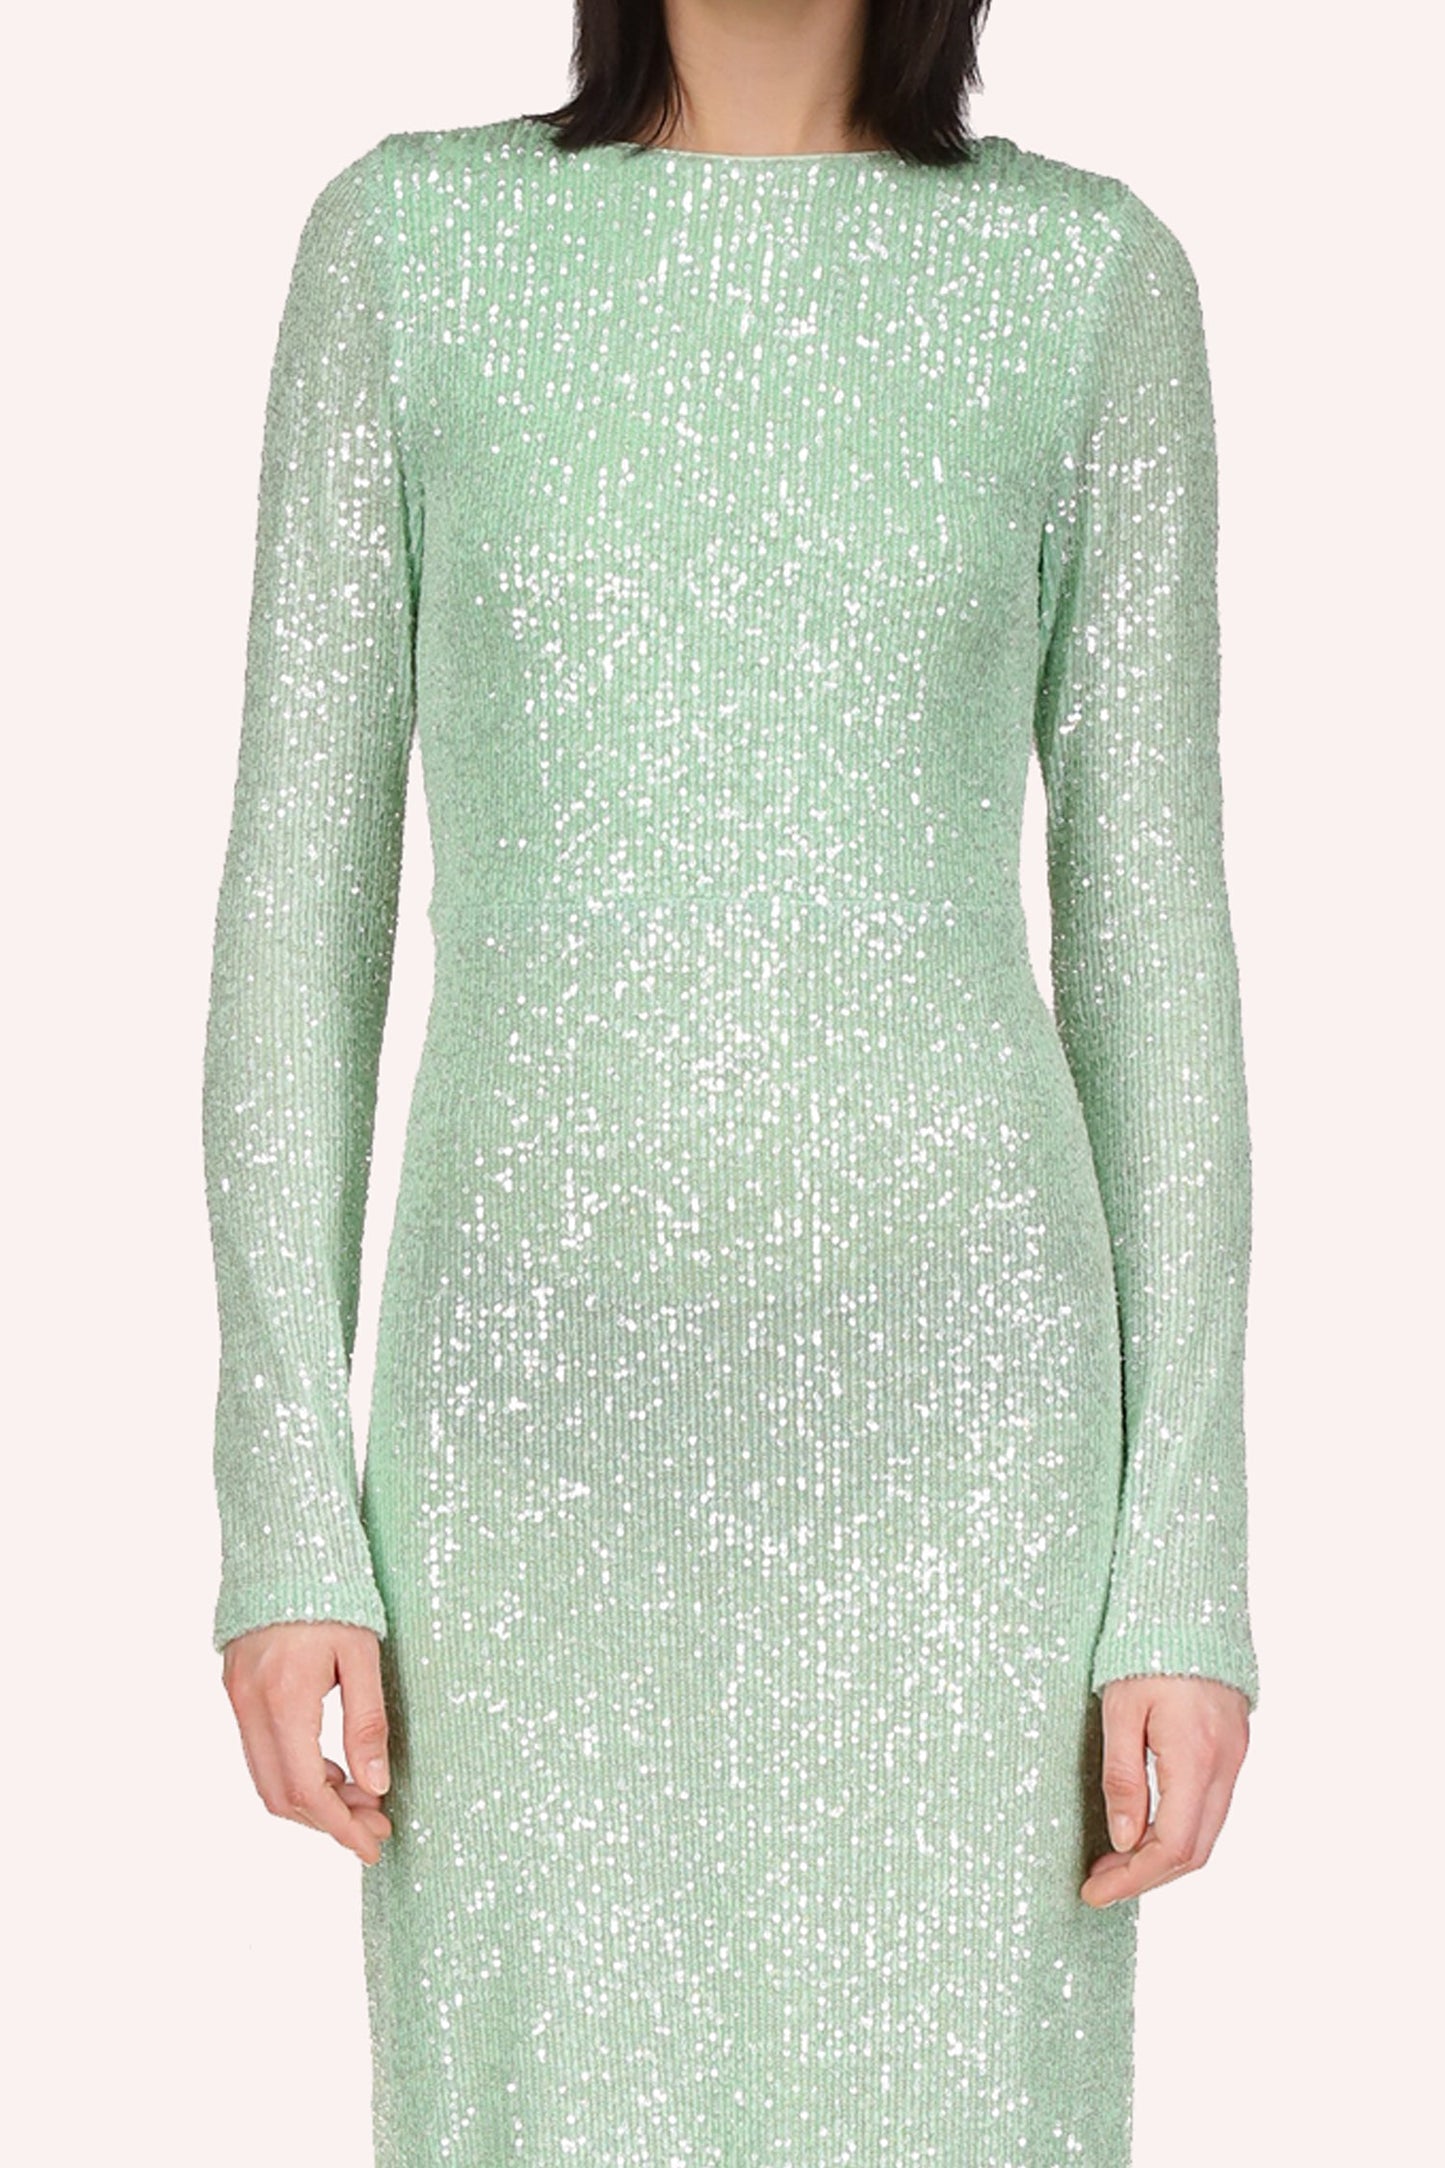 Sequin Mesh Dress peppermint by Anna Sui is a sophisticated gown in a peppermint color